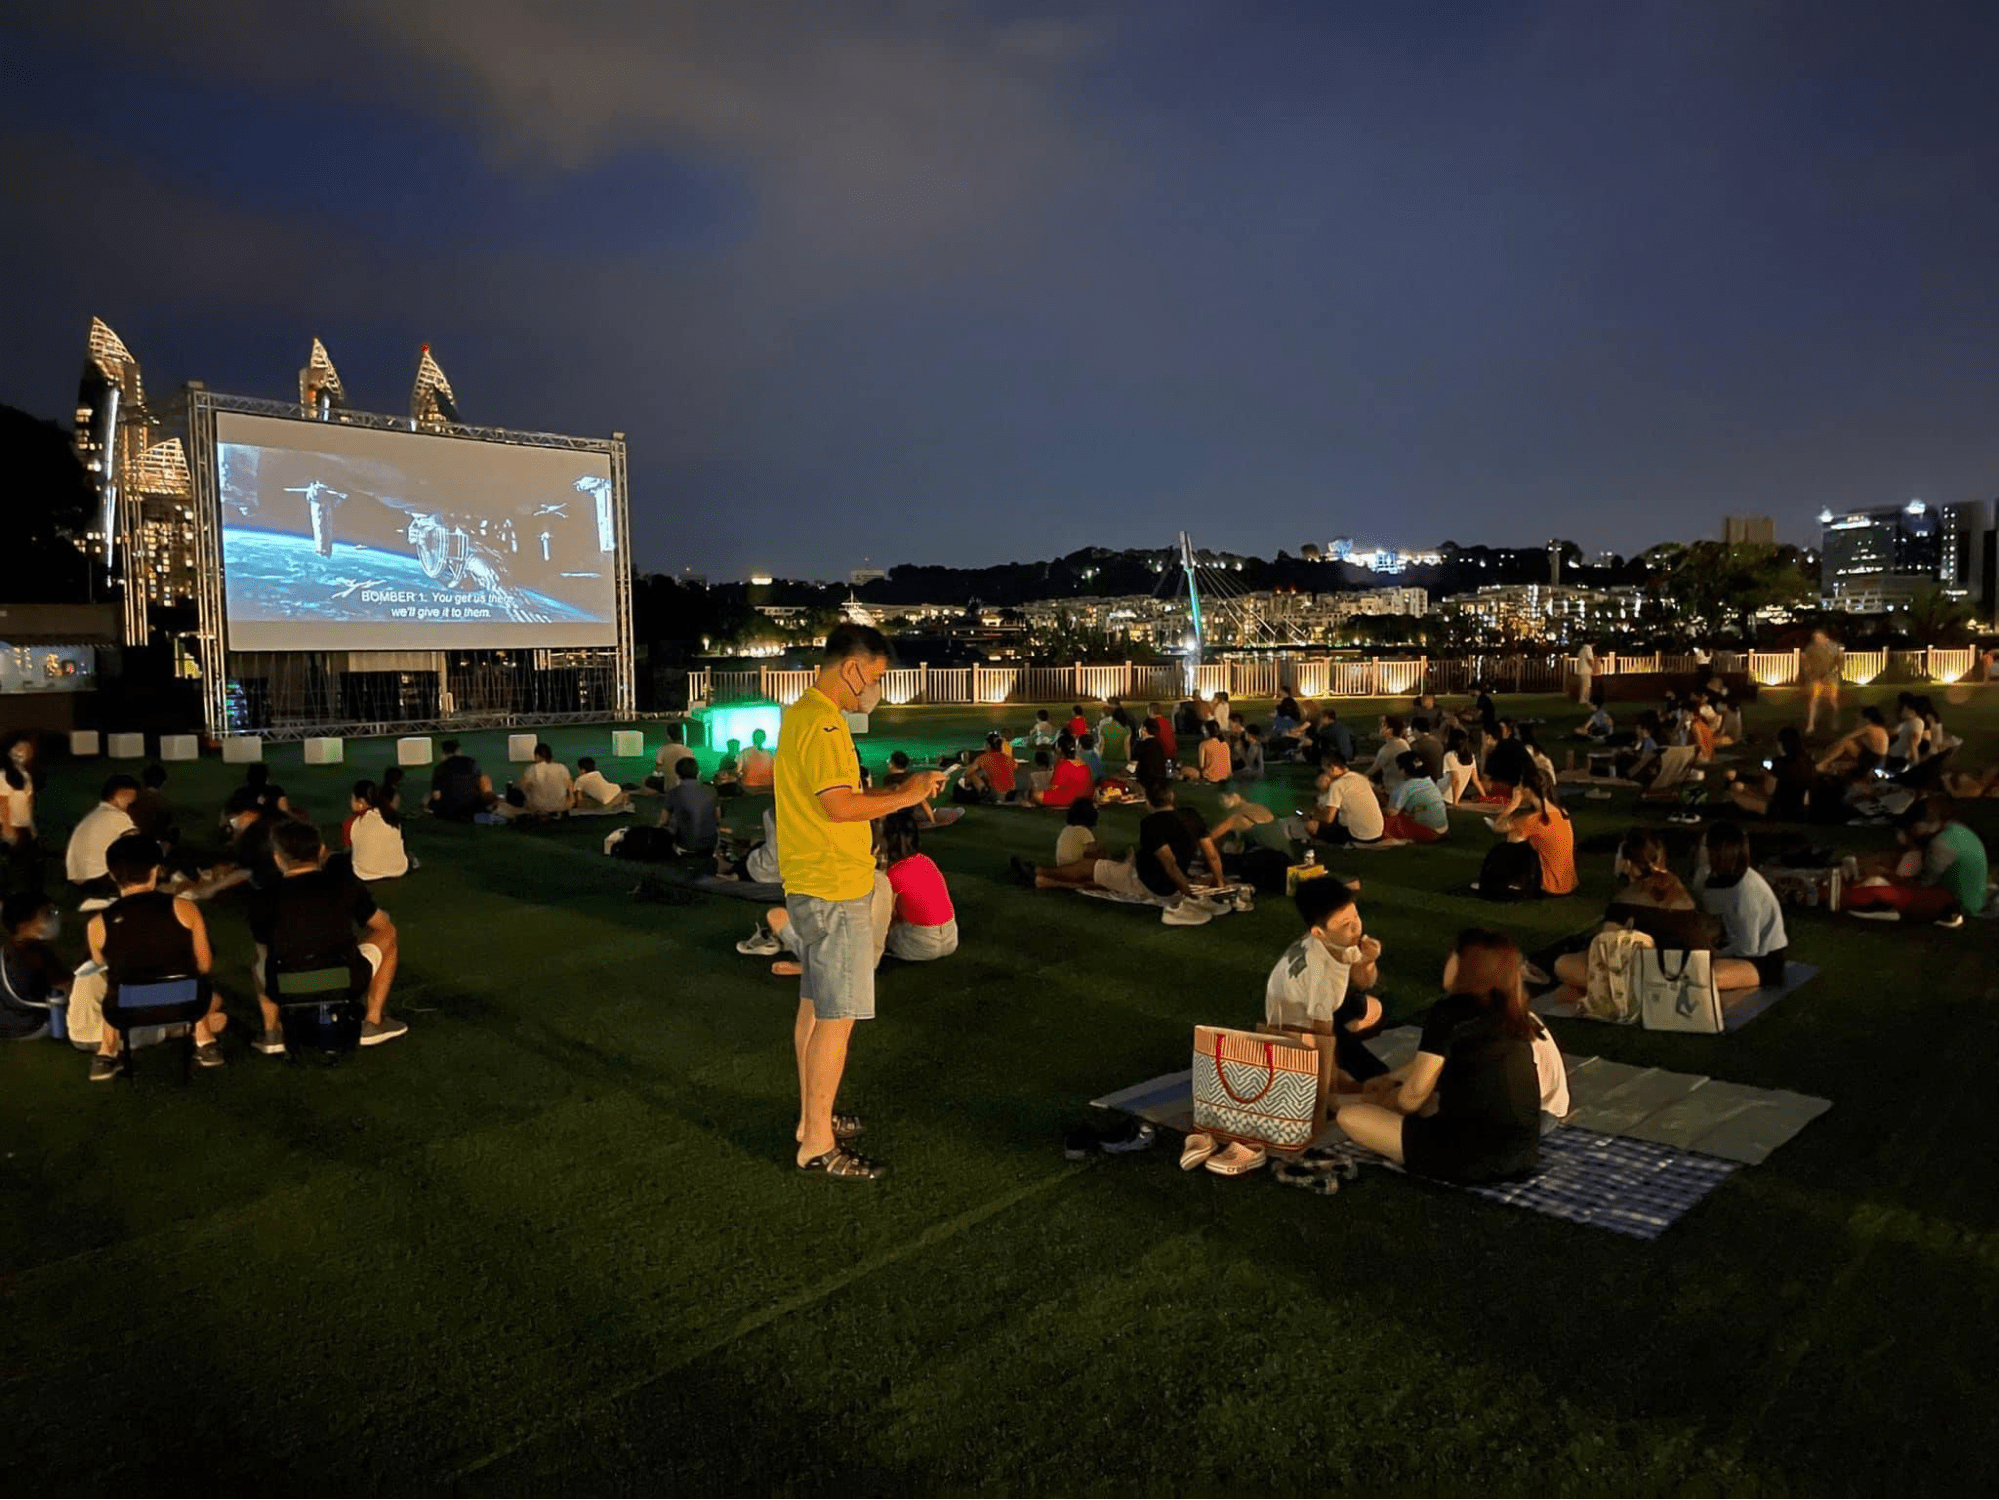 Movies by the beach in Sentosa